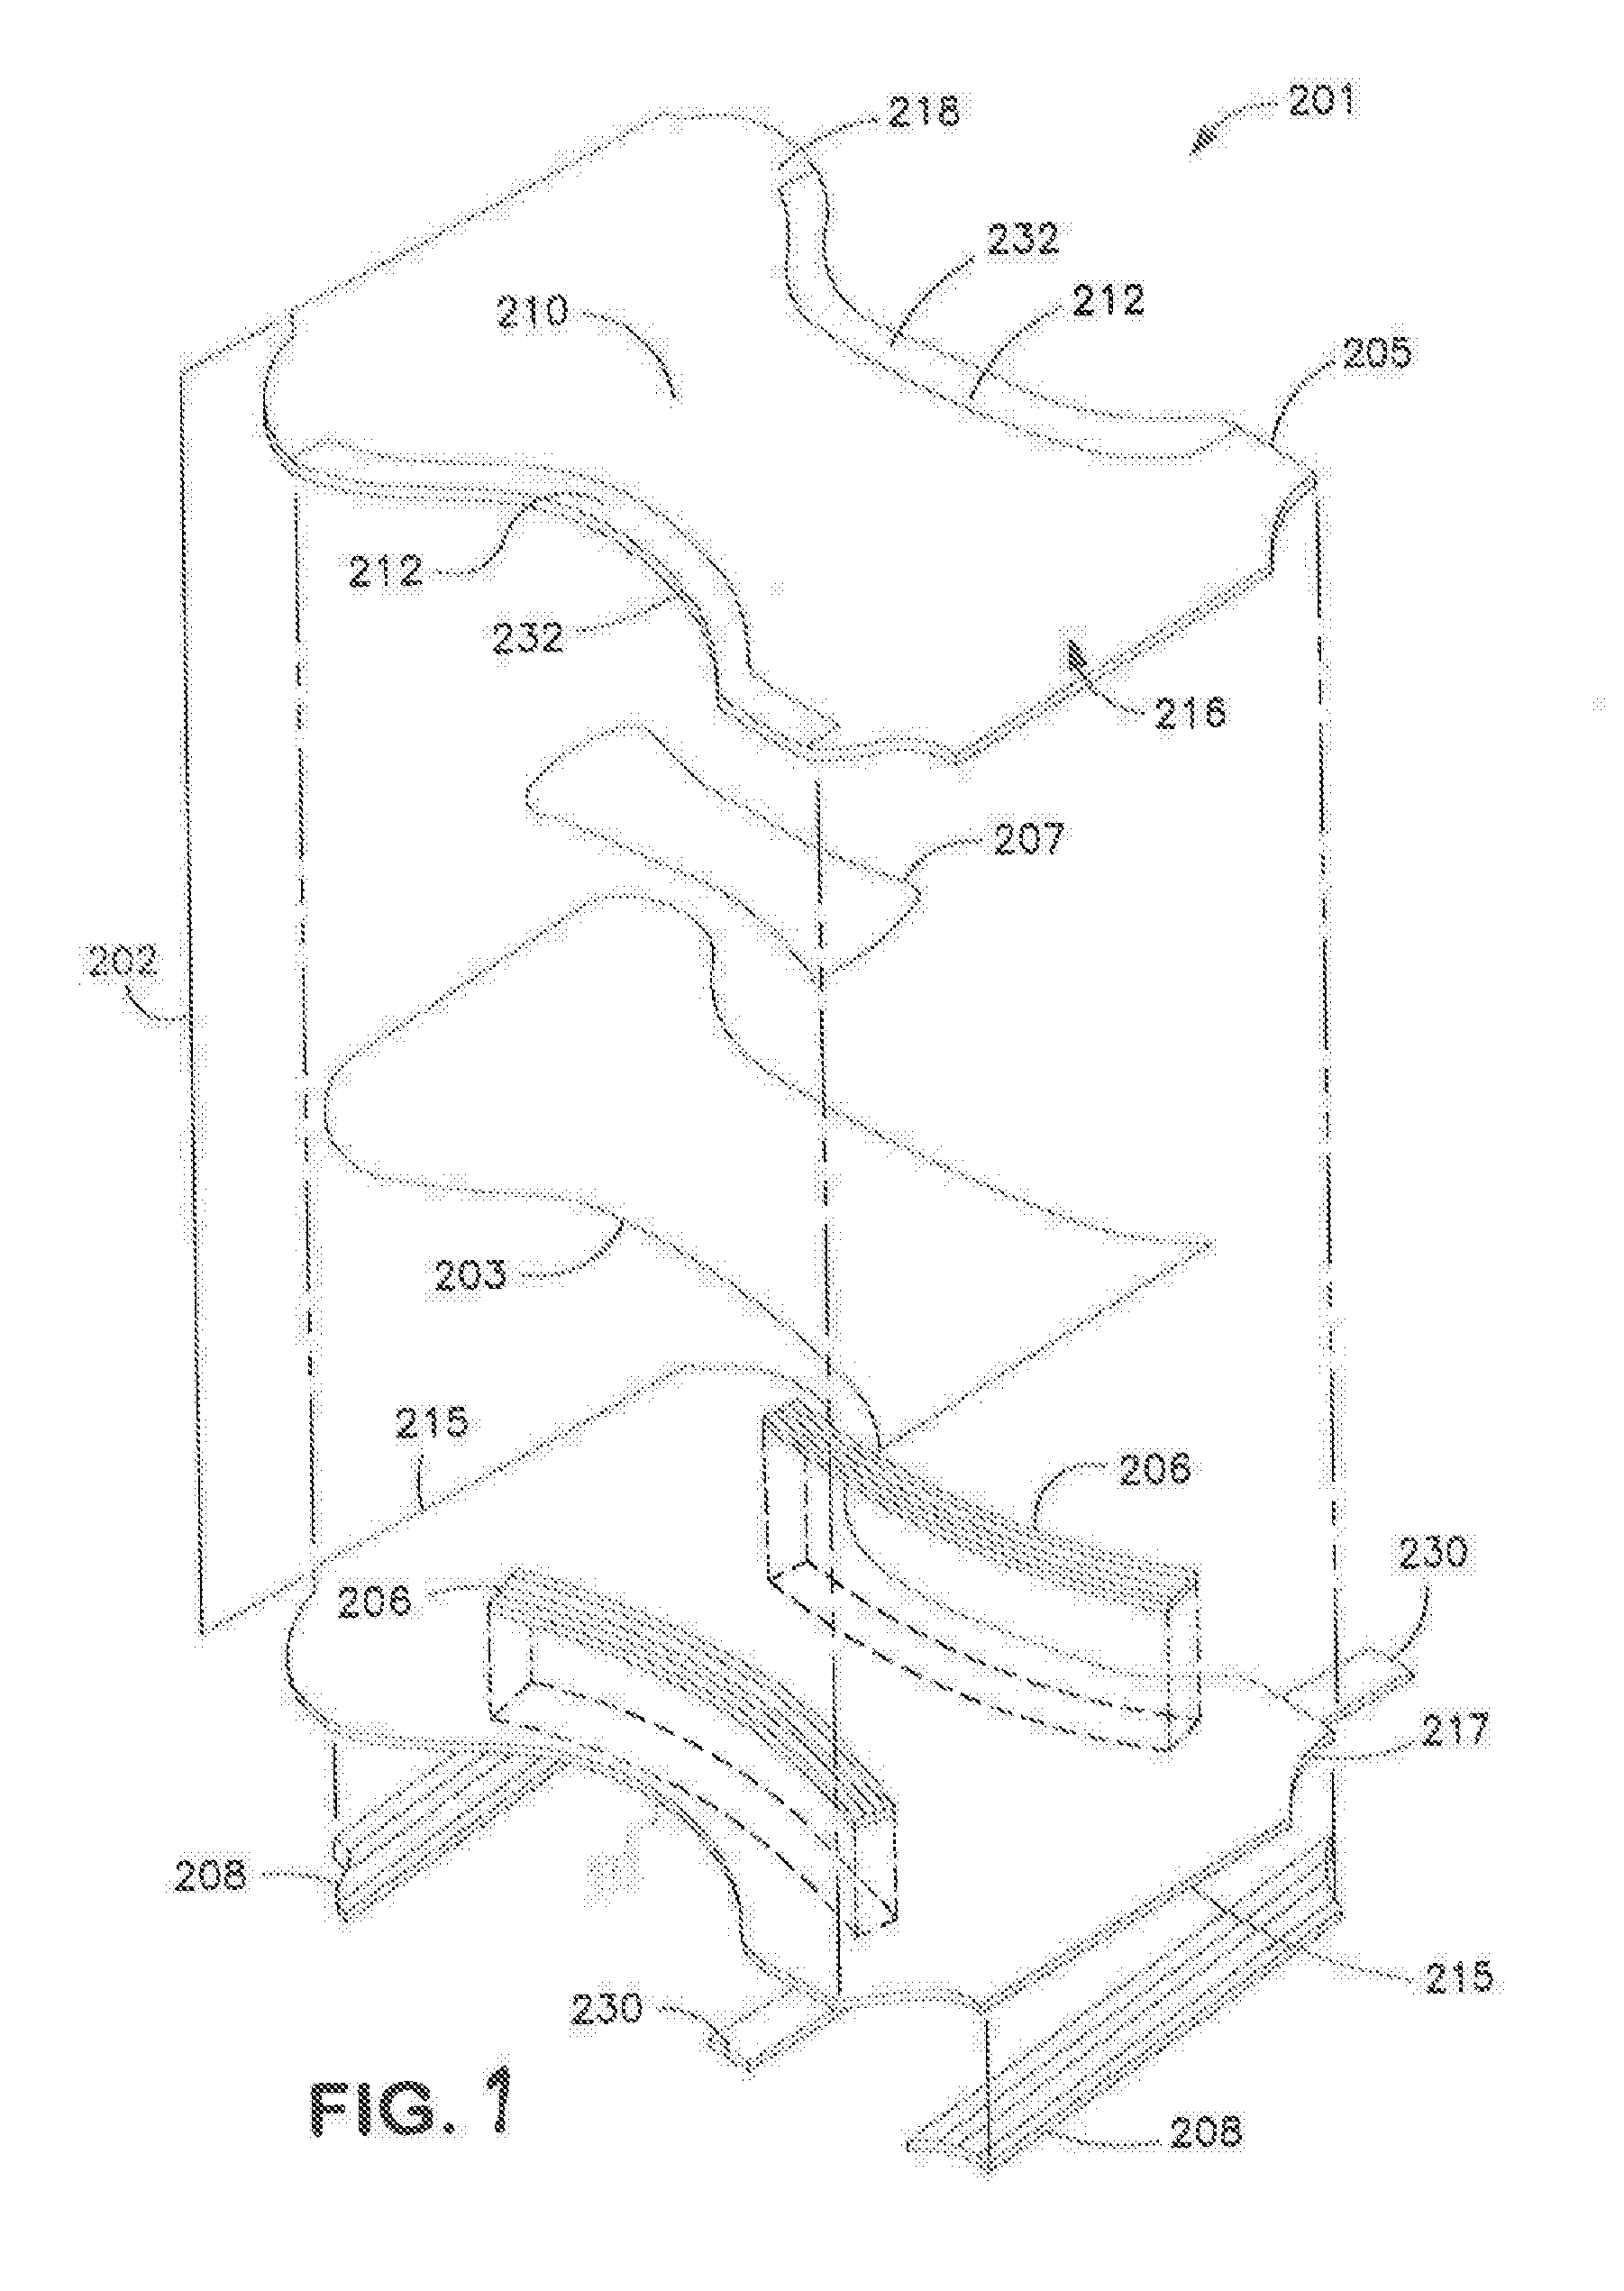 Absorbent Article Containing a Nonwoven Web Formed from a Porous Polyolefin Fibers